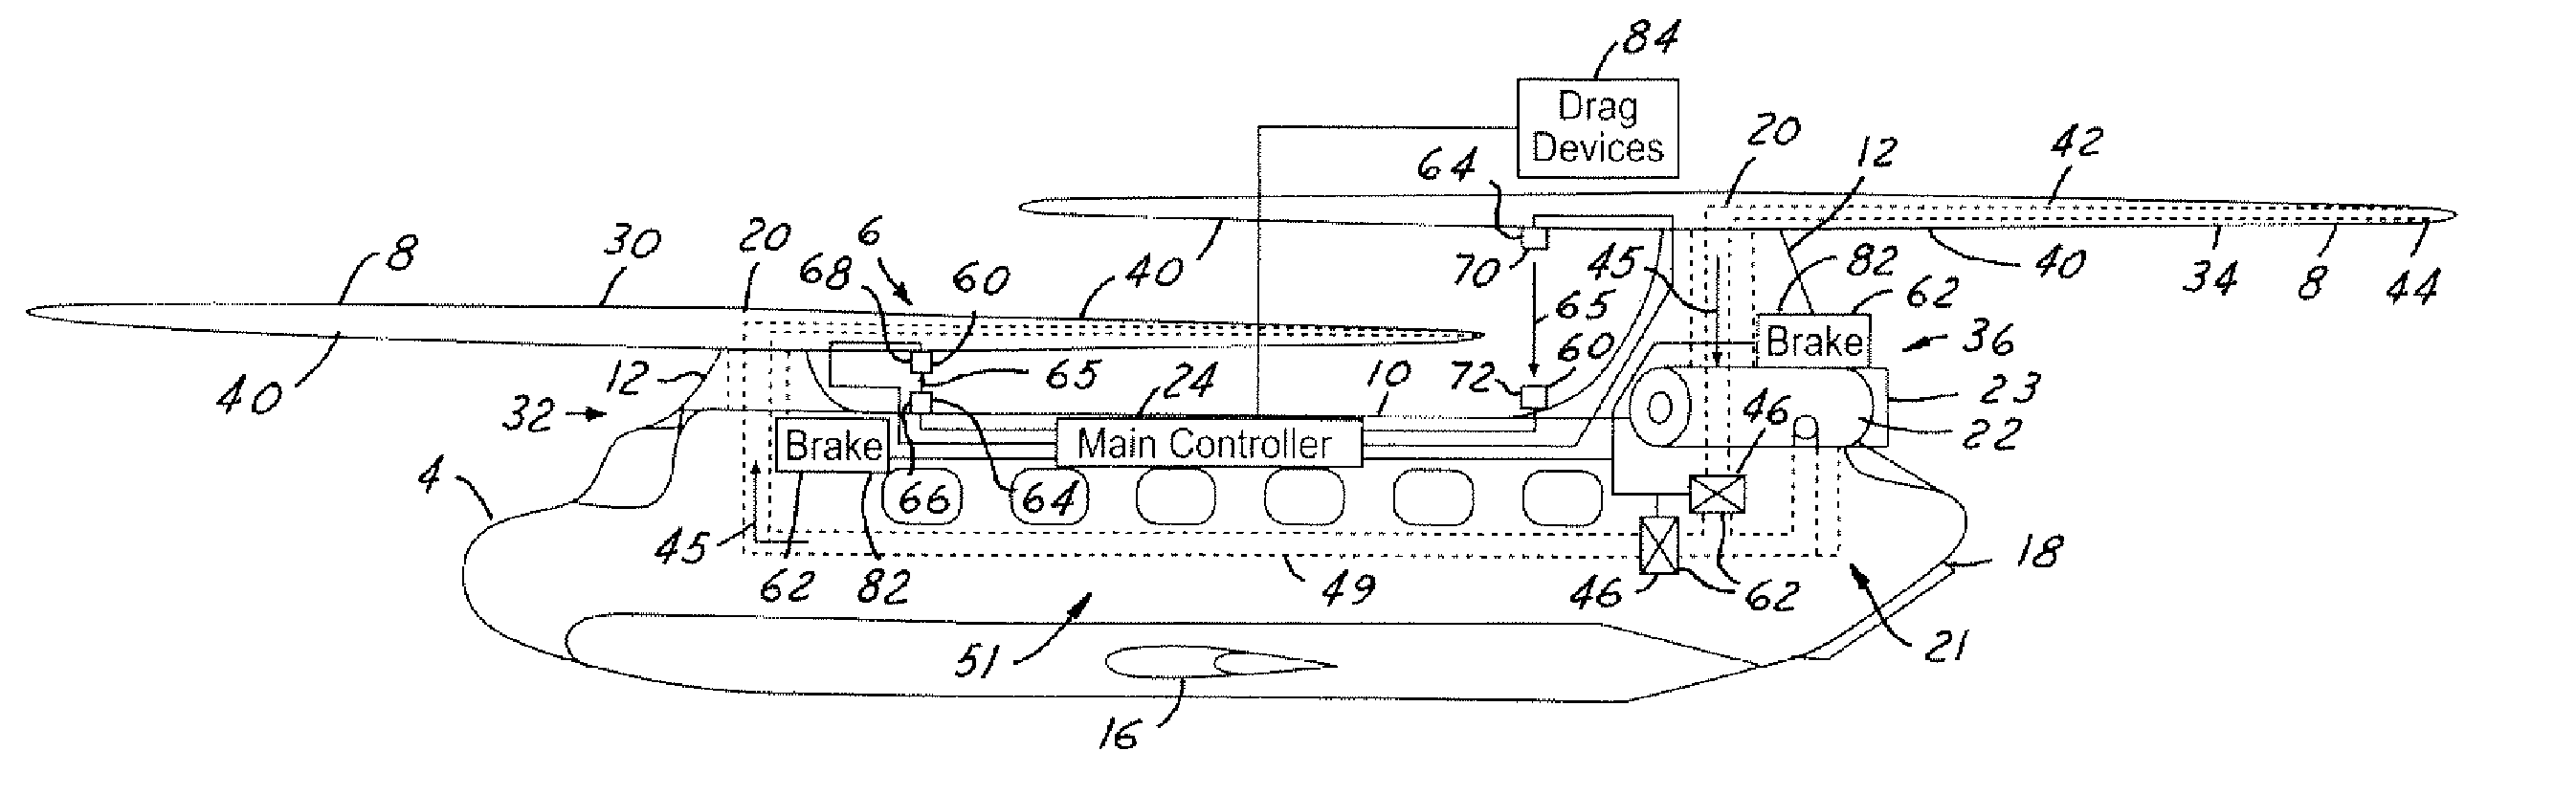 Tandem rotor wing rotational position control system